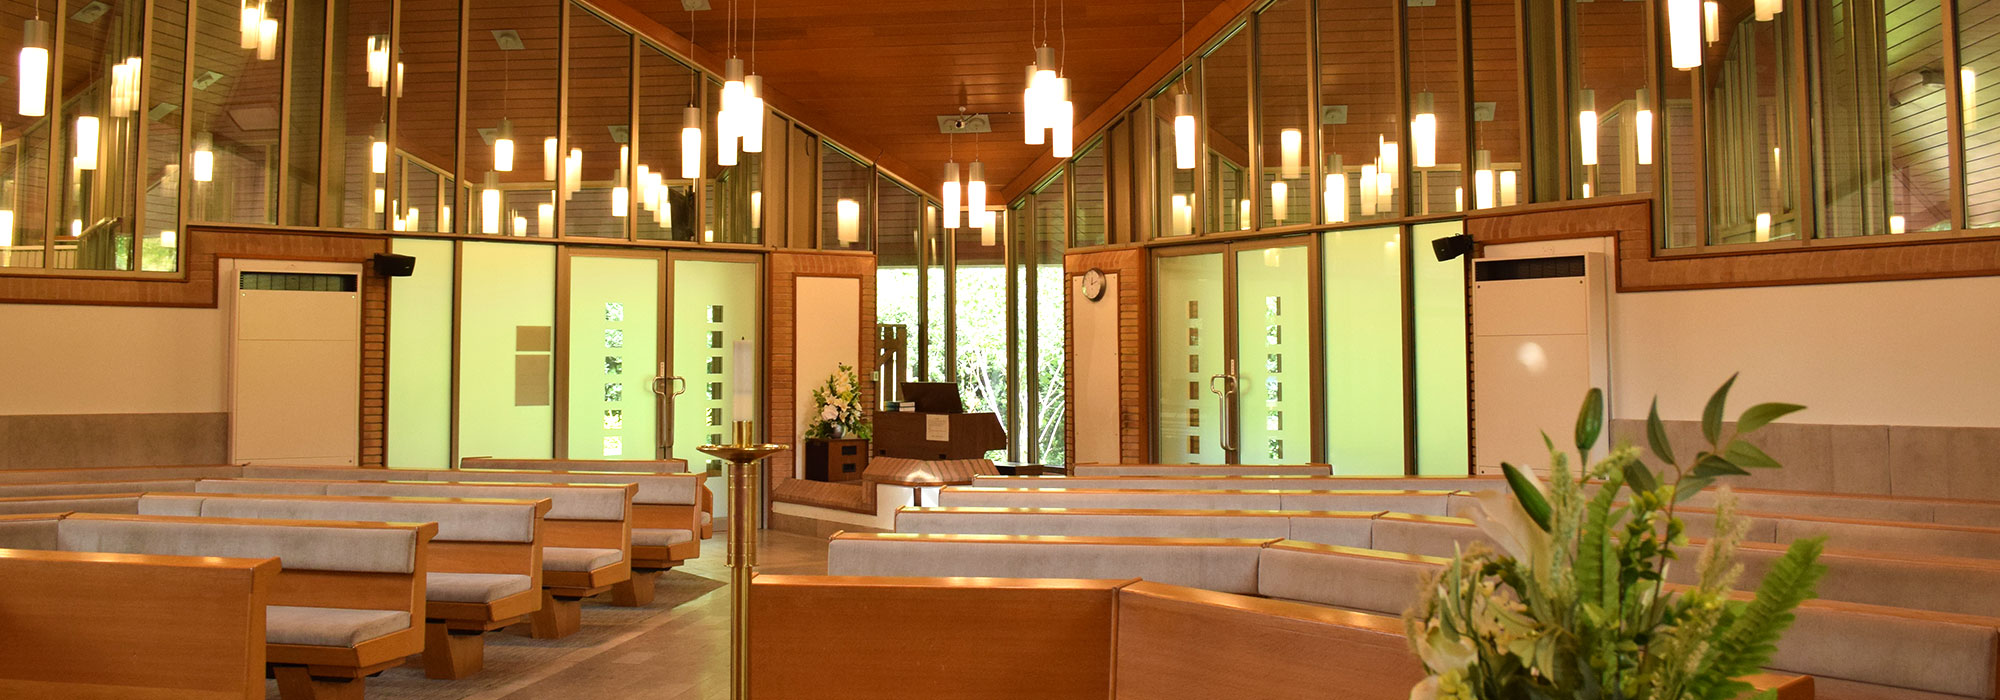 The wooden interior of St. Bede's Chapel